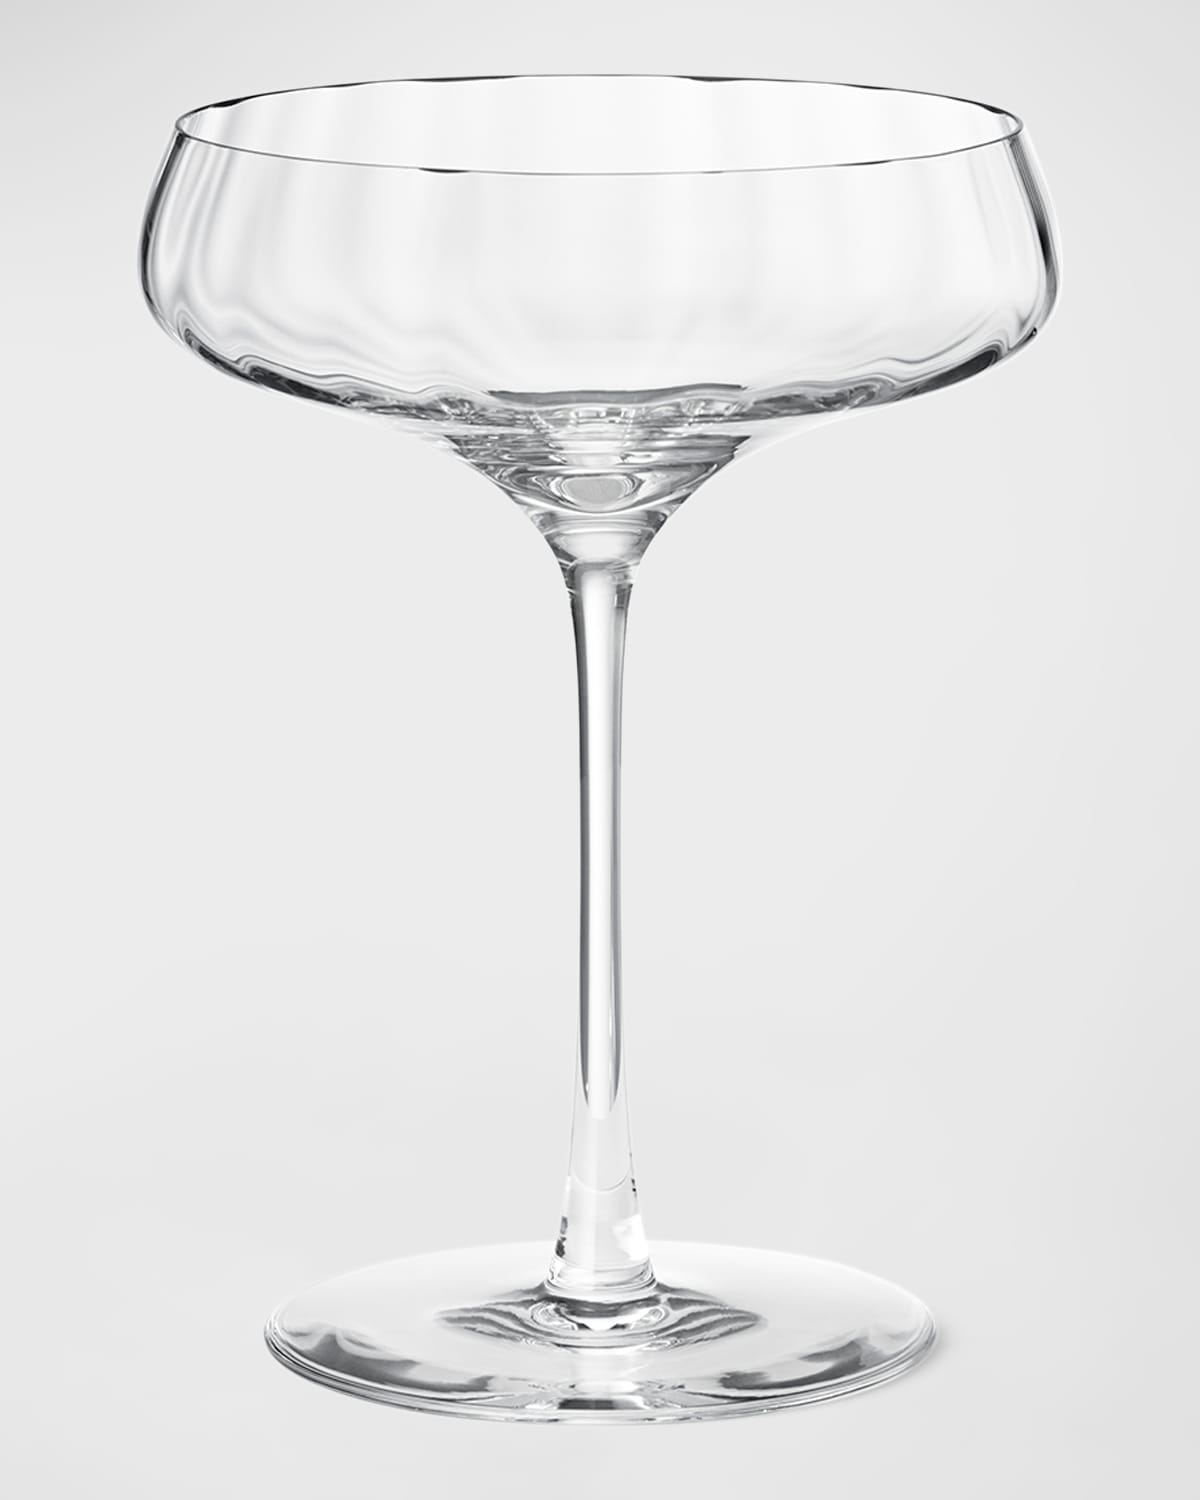 Georg Jensen Bernadotte Cocktail Coupe Glasses, Set Of 2 In Clear